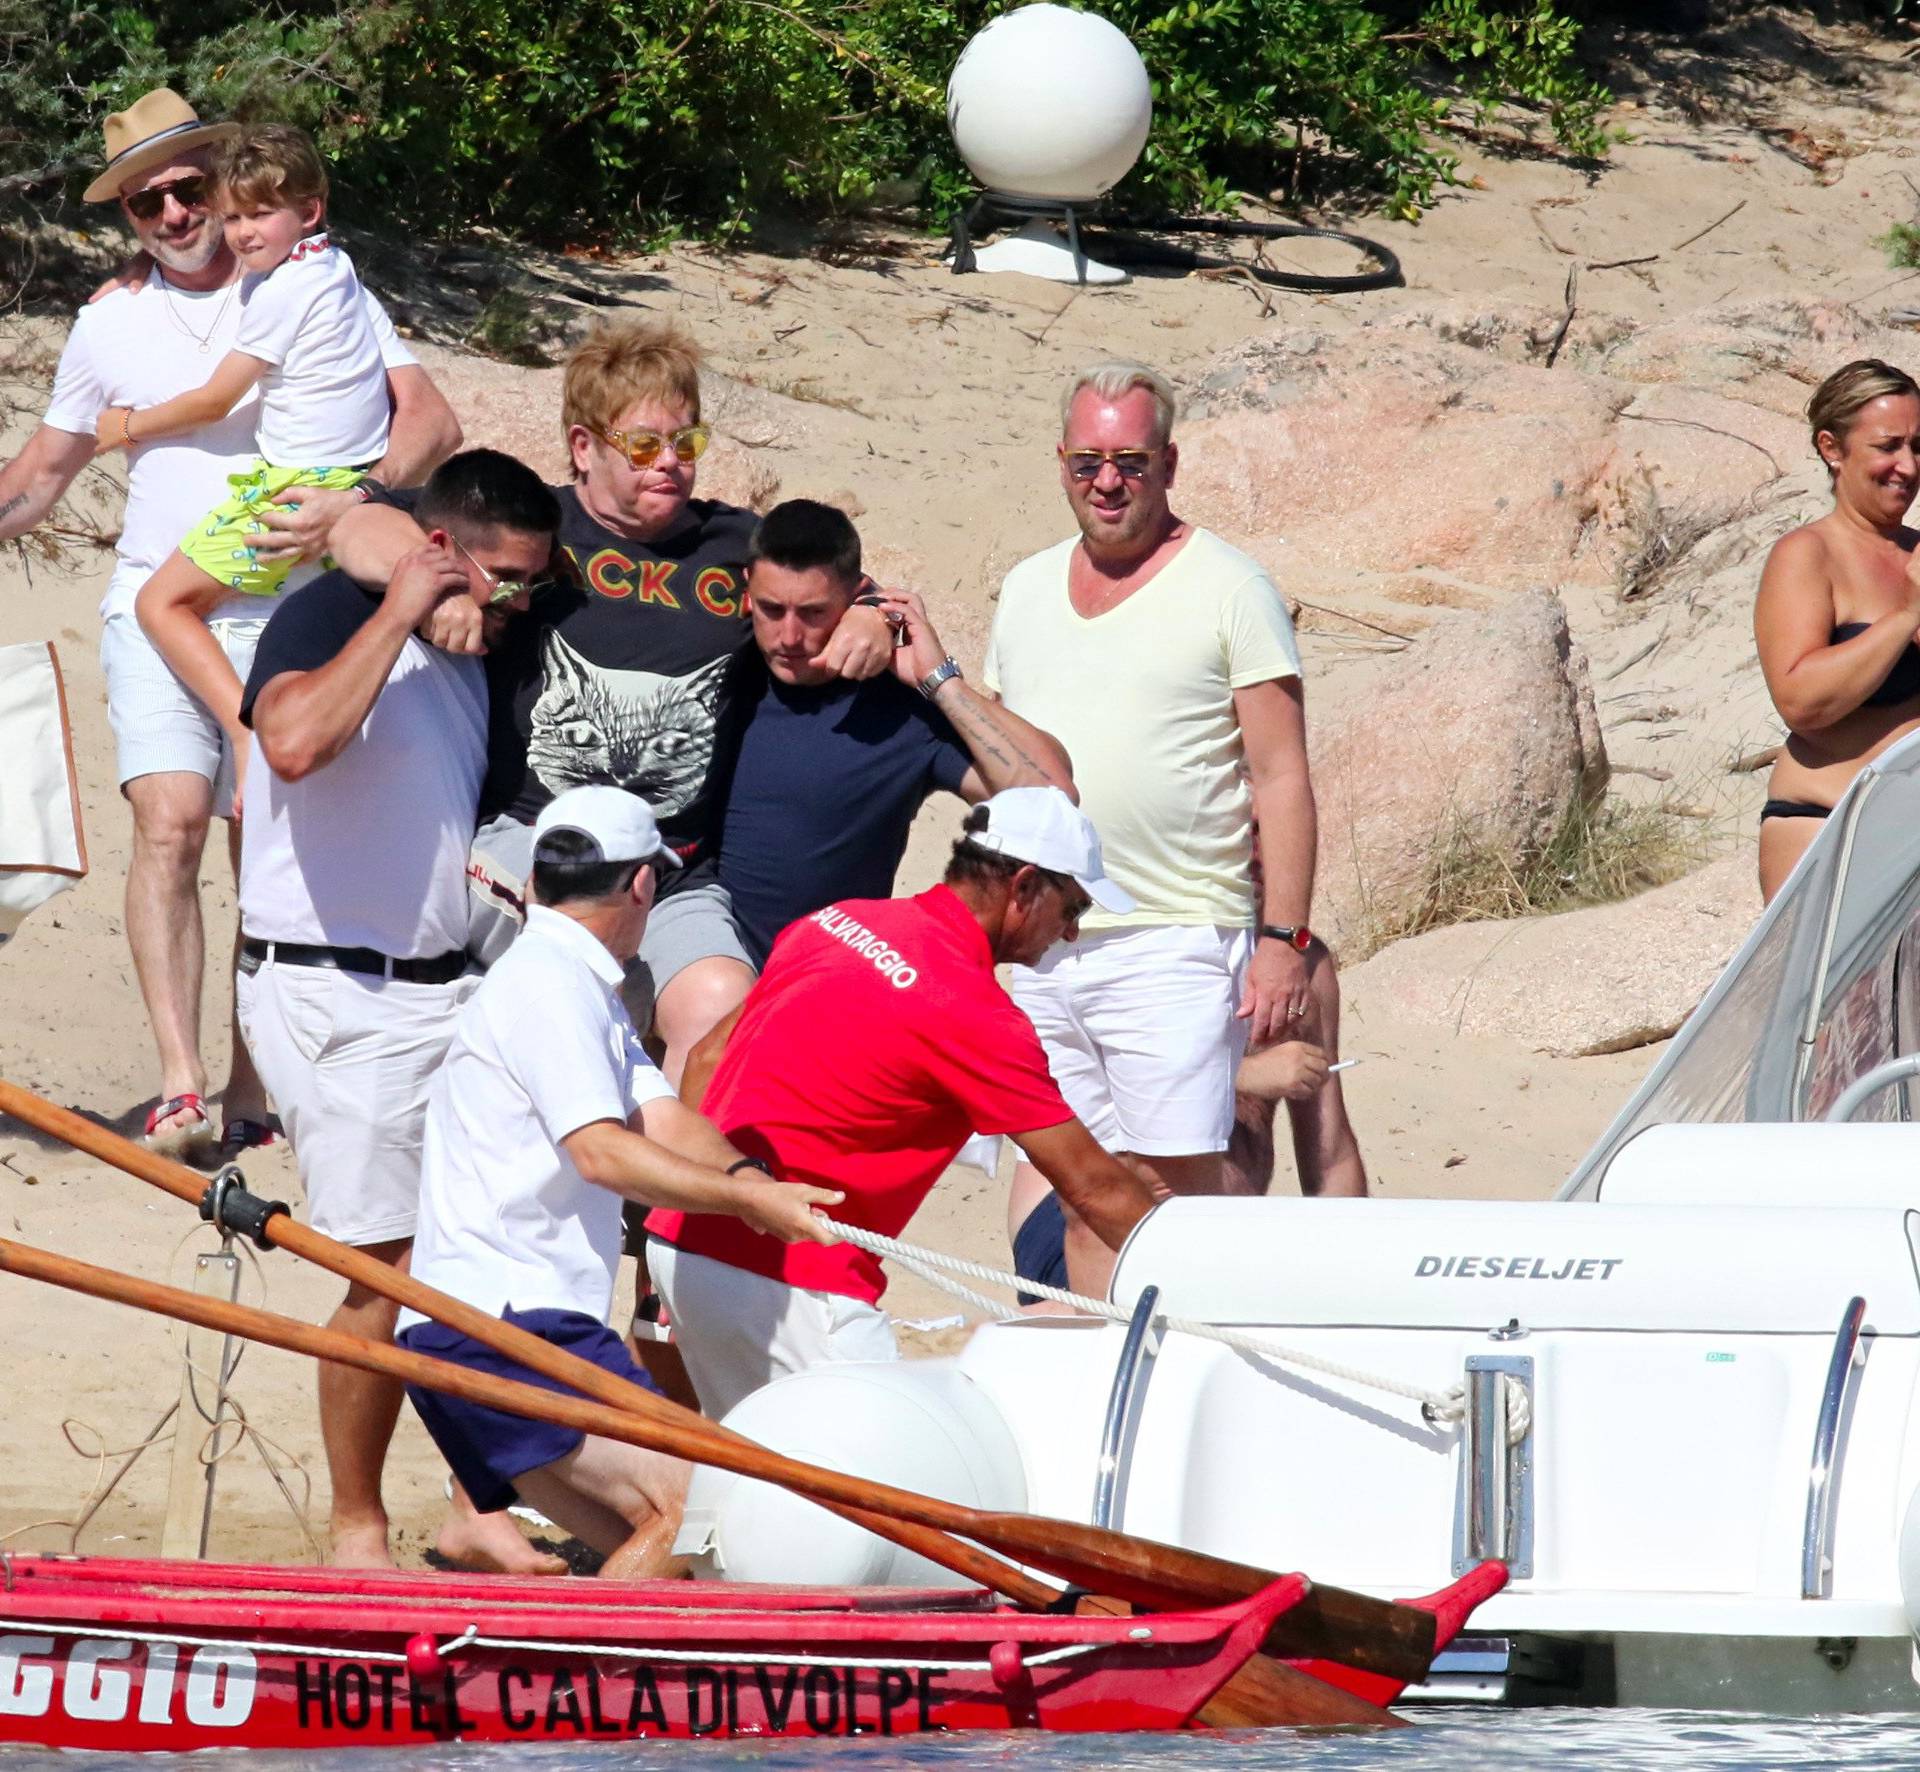 Elton John gets on a boat, as he leaves restaurant with David Furnish and kids